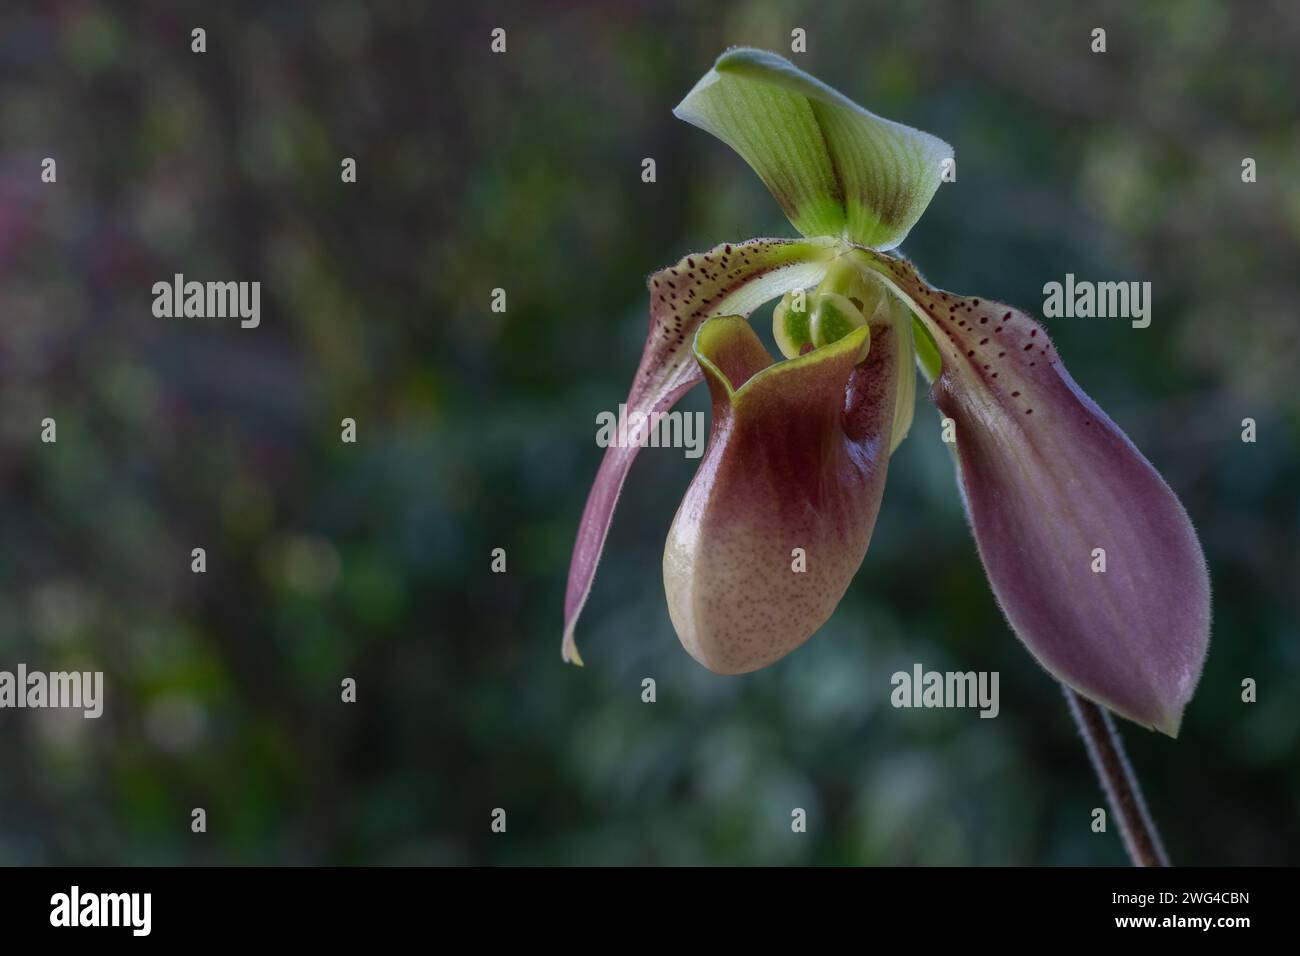 Closeup view of purple red and green flower of lady slipper orchid species paphiopedilum appletonianum var. hainanense isolated on natural background Stock Photo